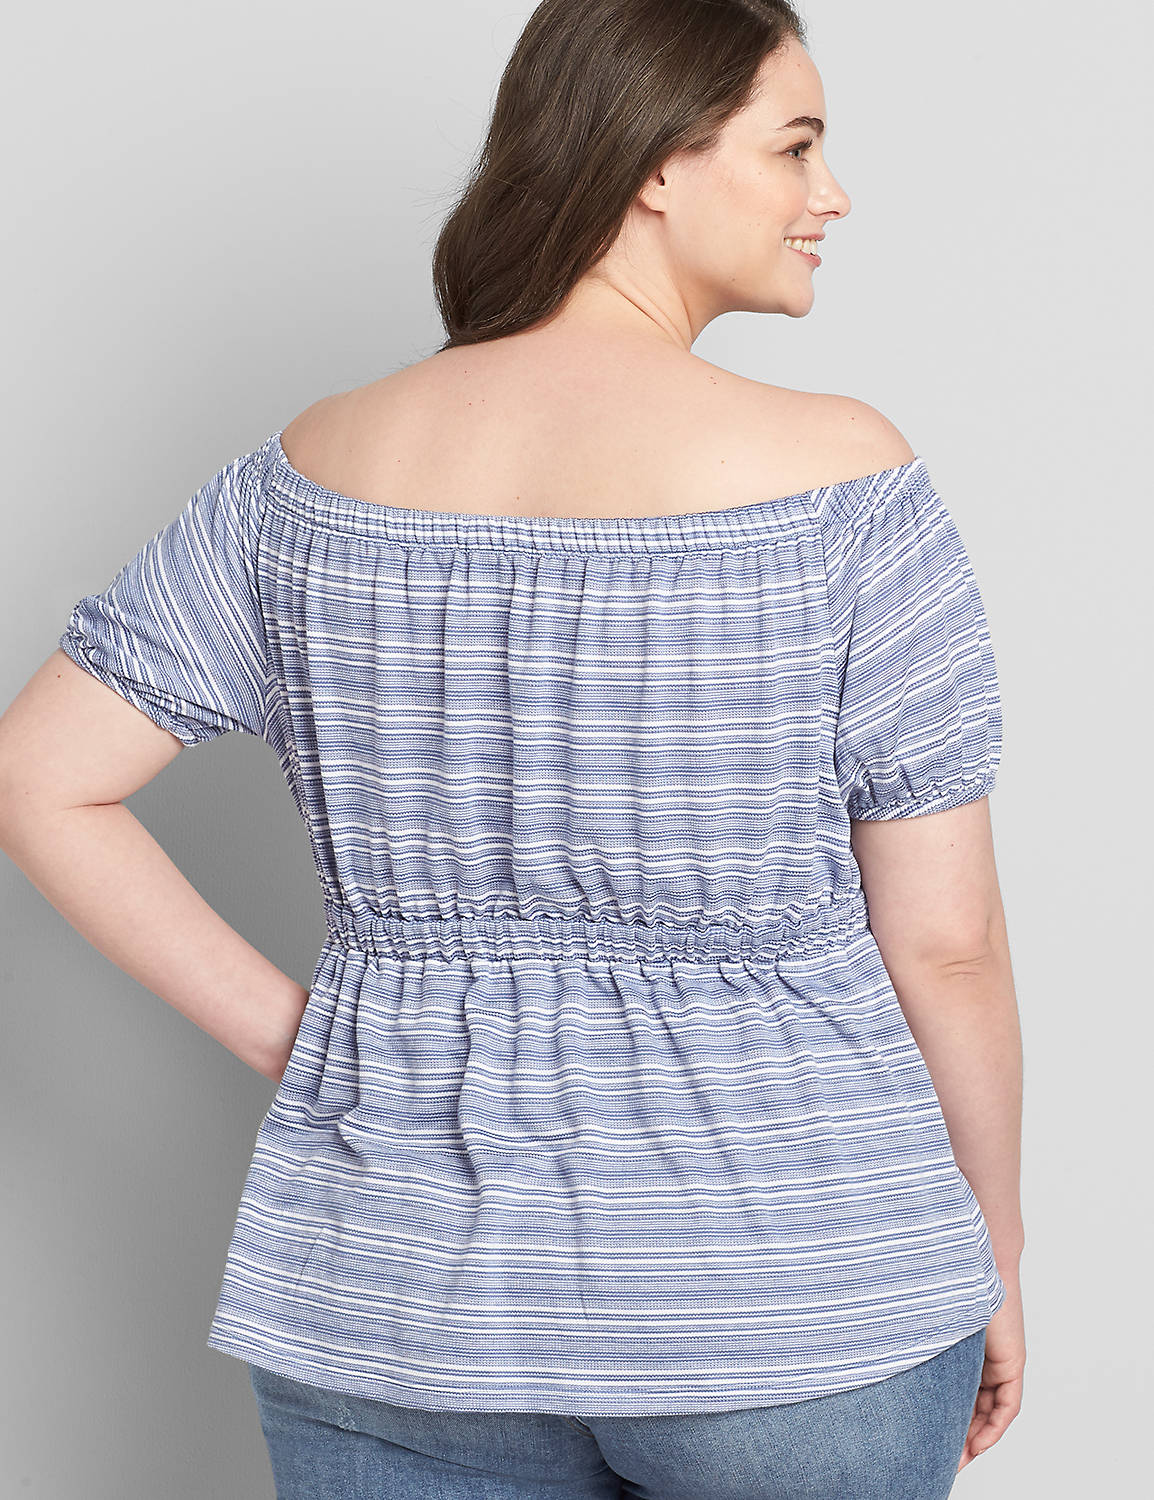 Striped Convertible Off-The-Shoulder Peplum Top Product Image 2